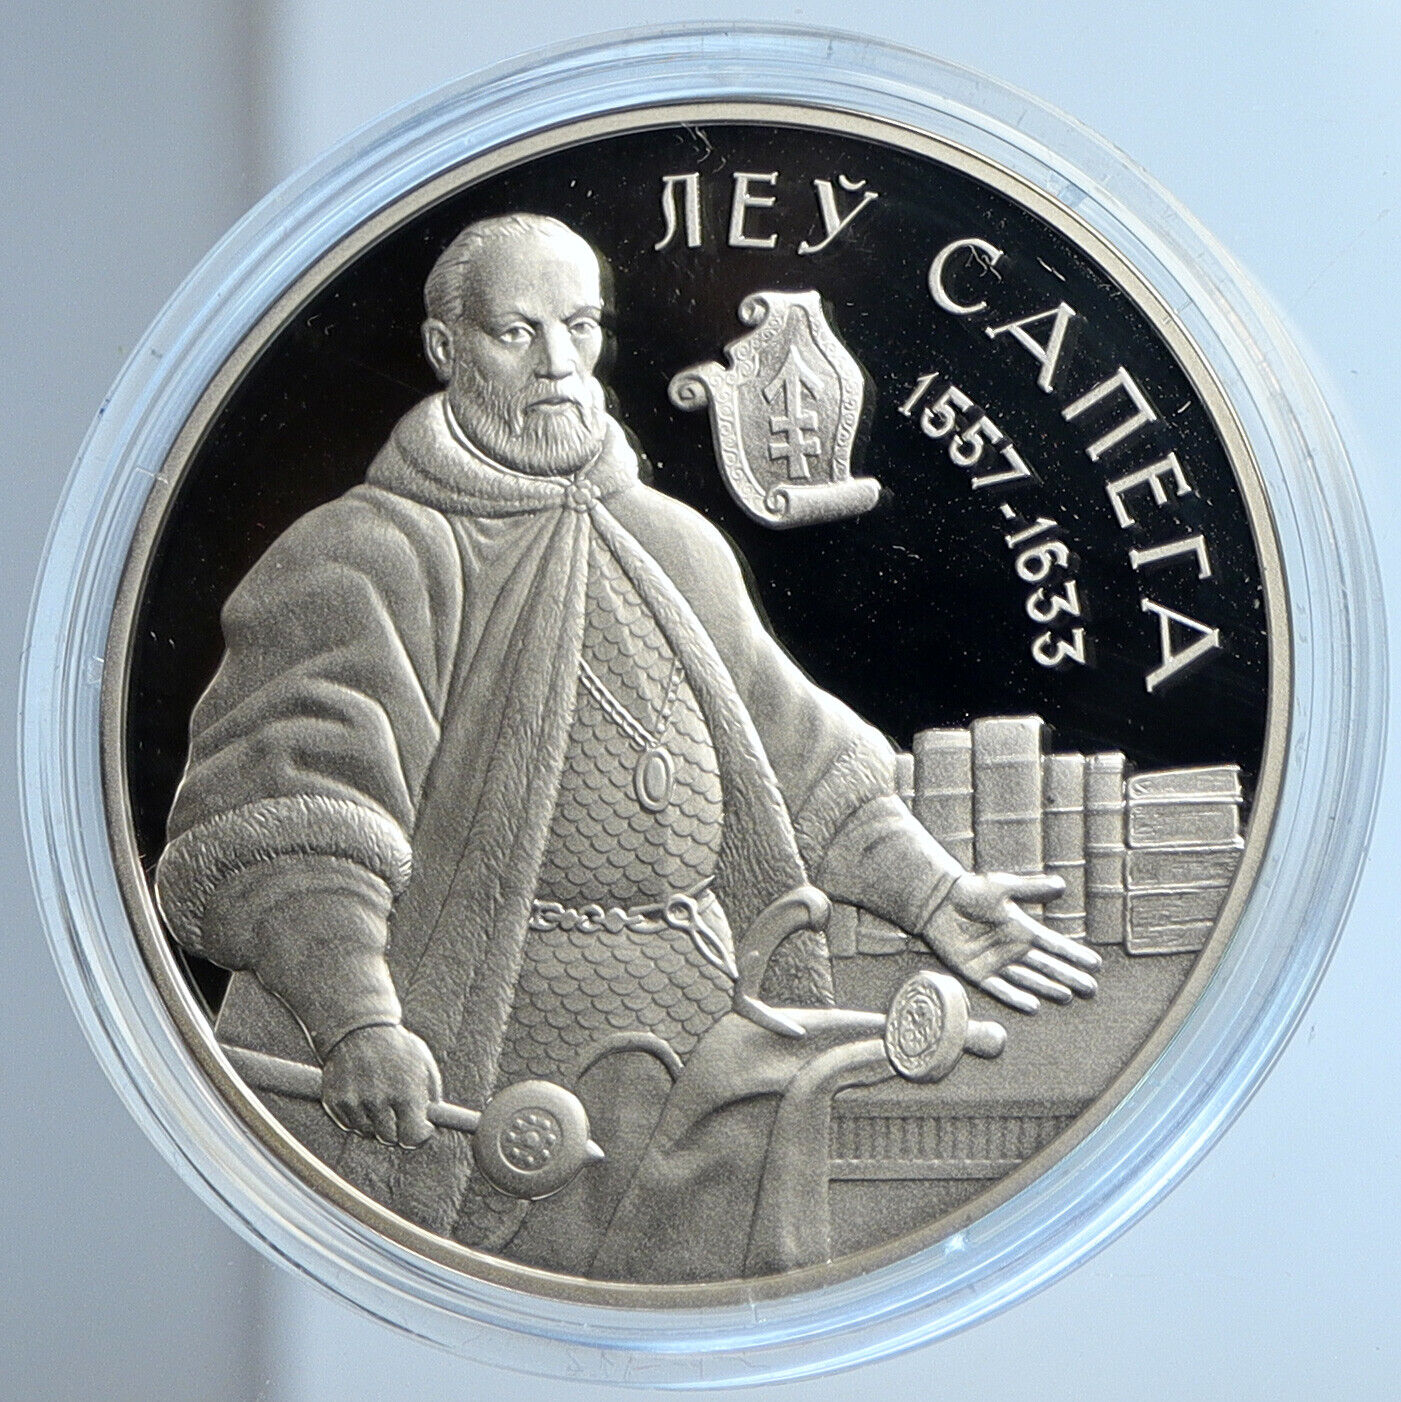 2010 BELARUS Ley Sapega Chancellor DEFENDERS Proof Silver 20 Rouble Coin i112915